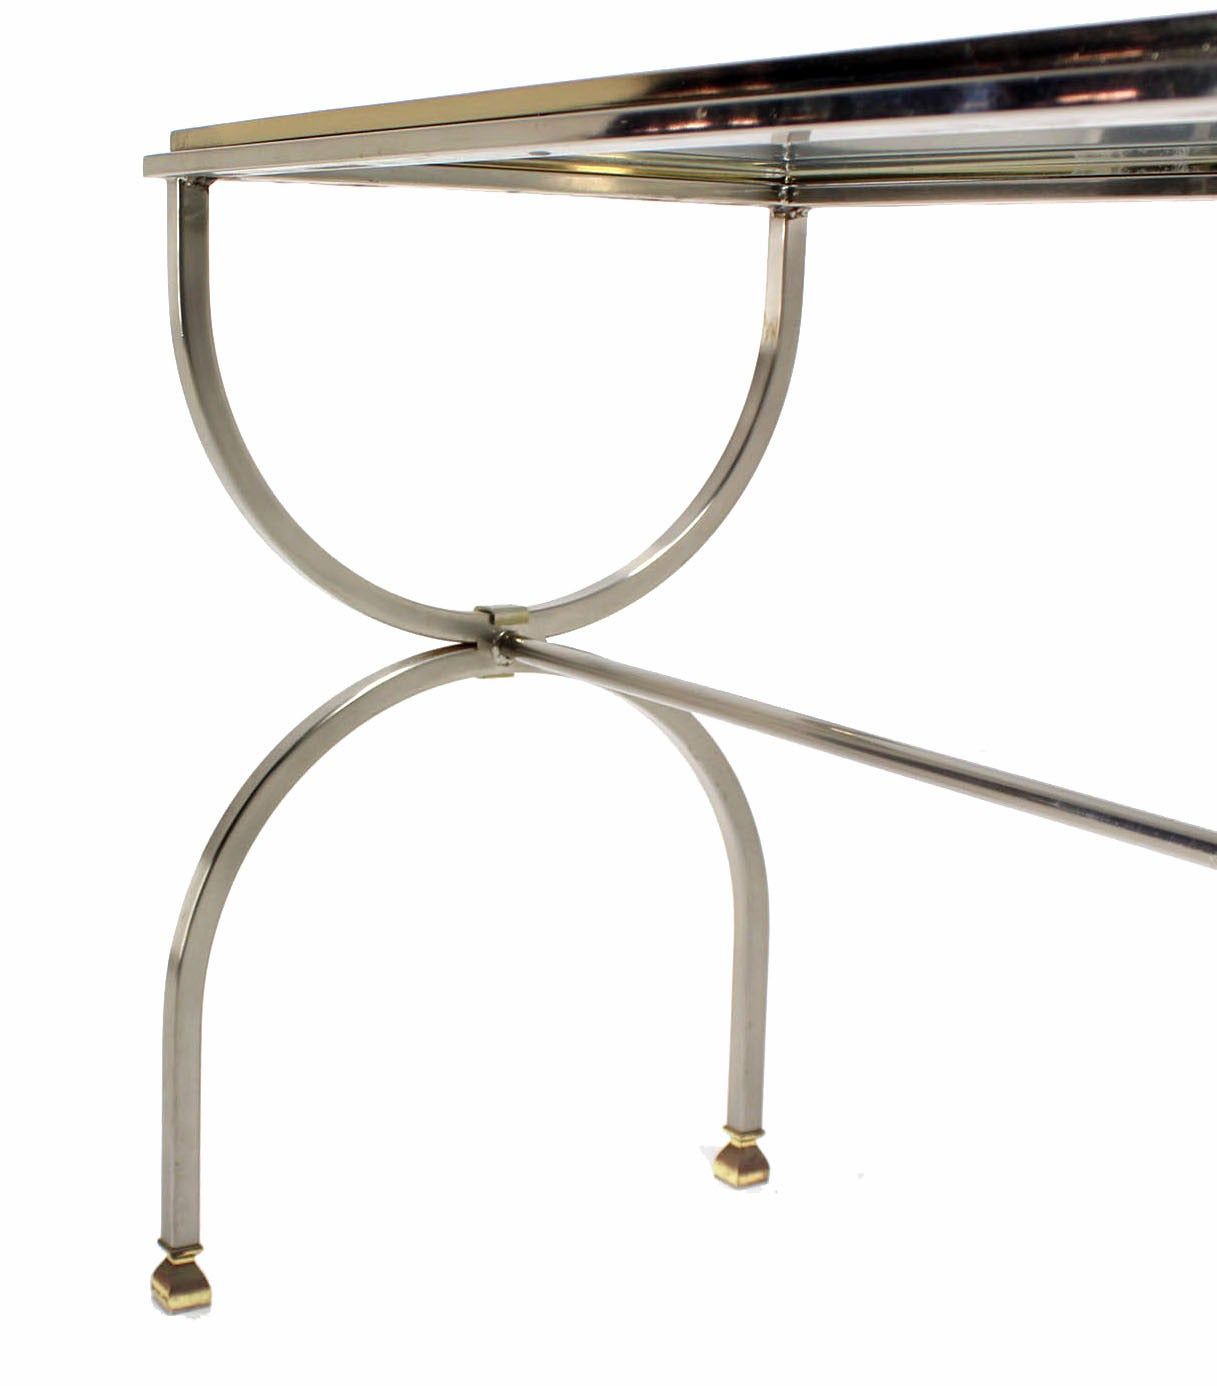 Chrome Brass And Glass Top Console Sofa Table For Sale At 1stdibs Throughout Chrome And Glass Modern Console Tables (View 7 of 20)